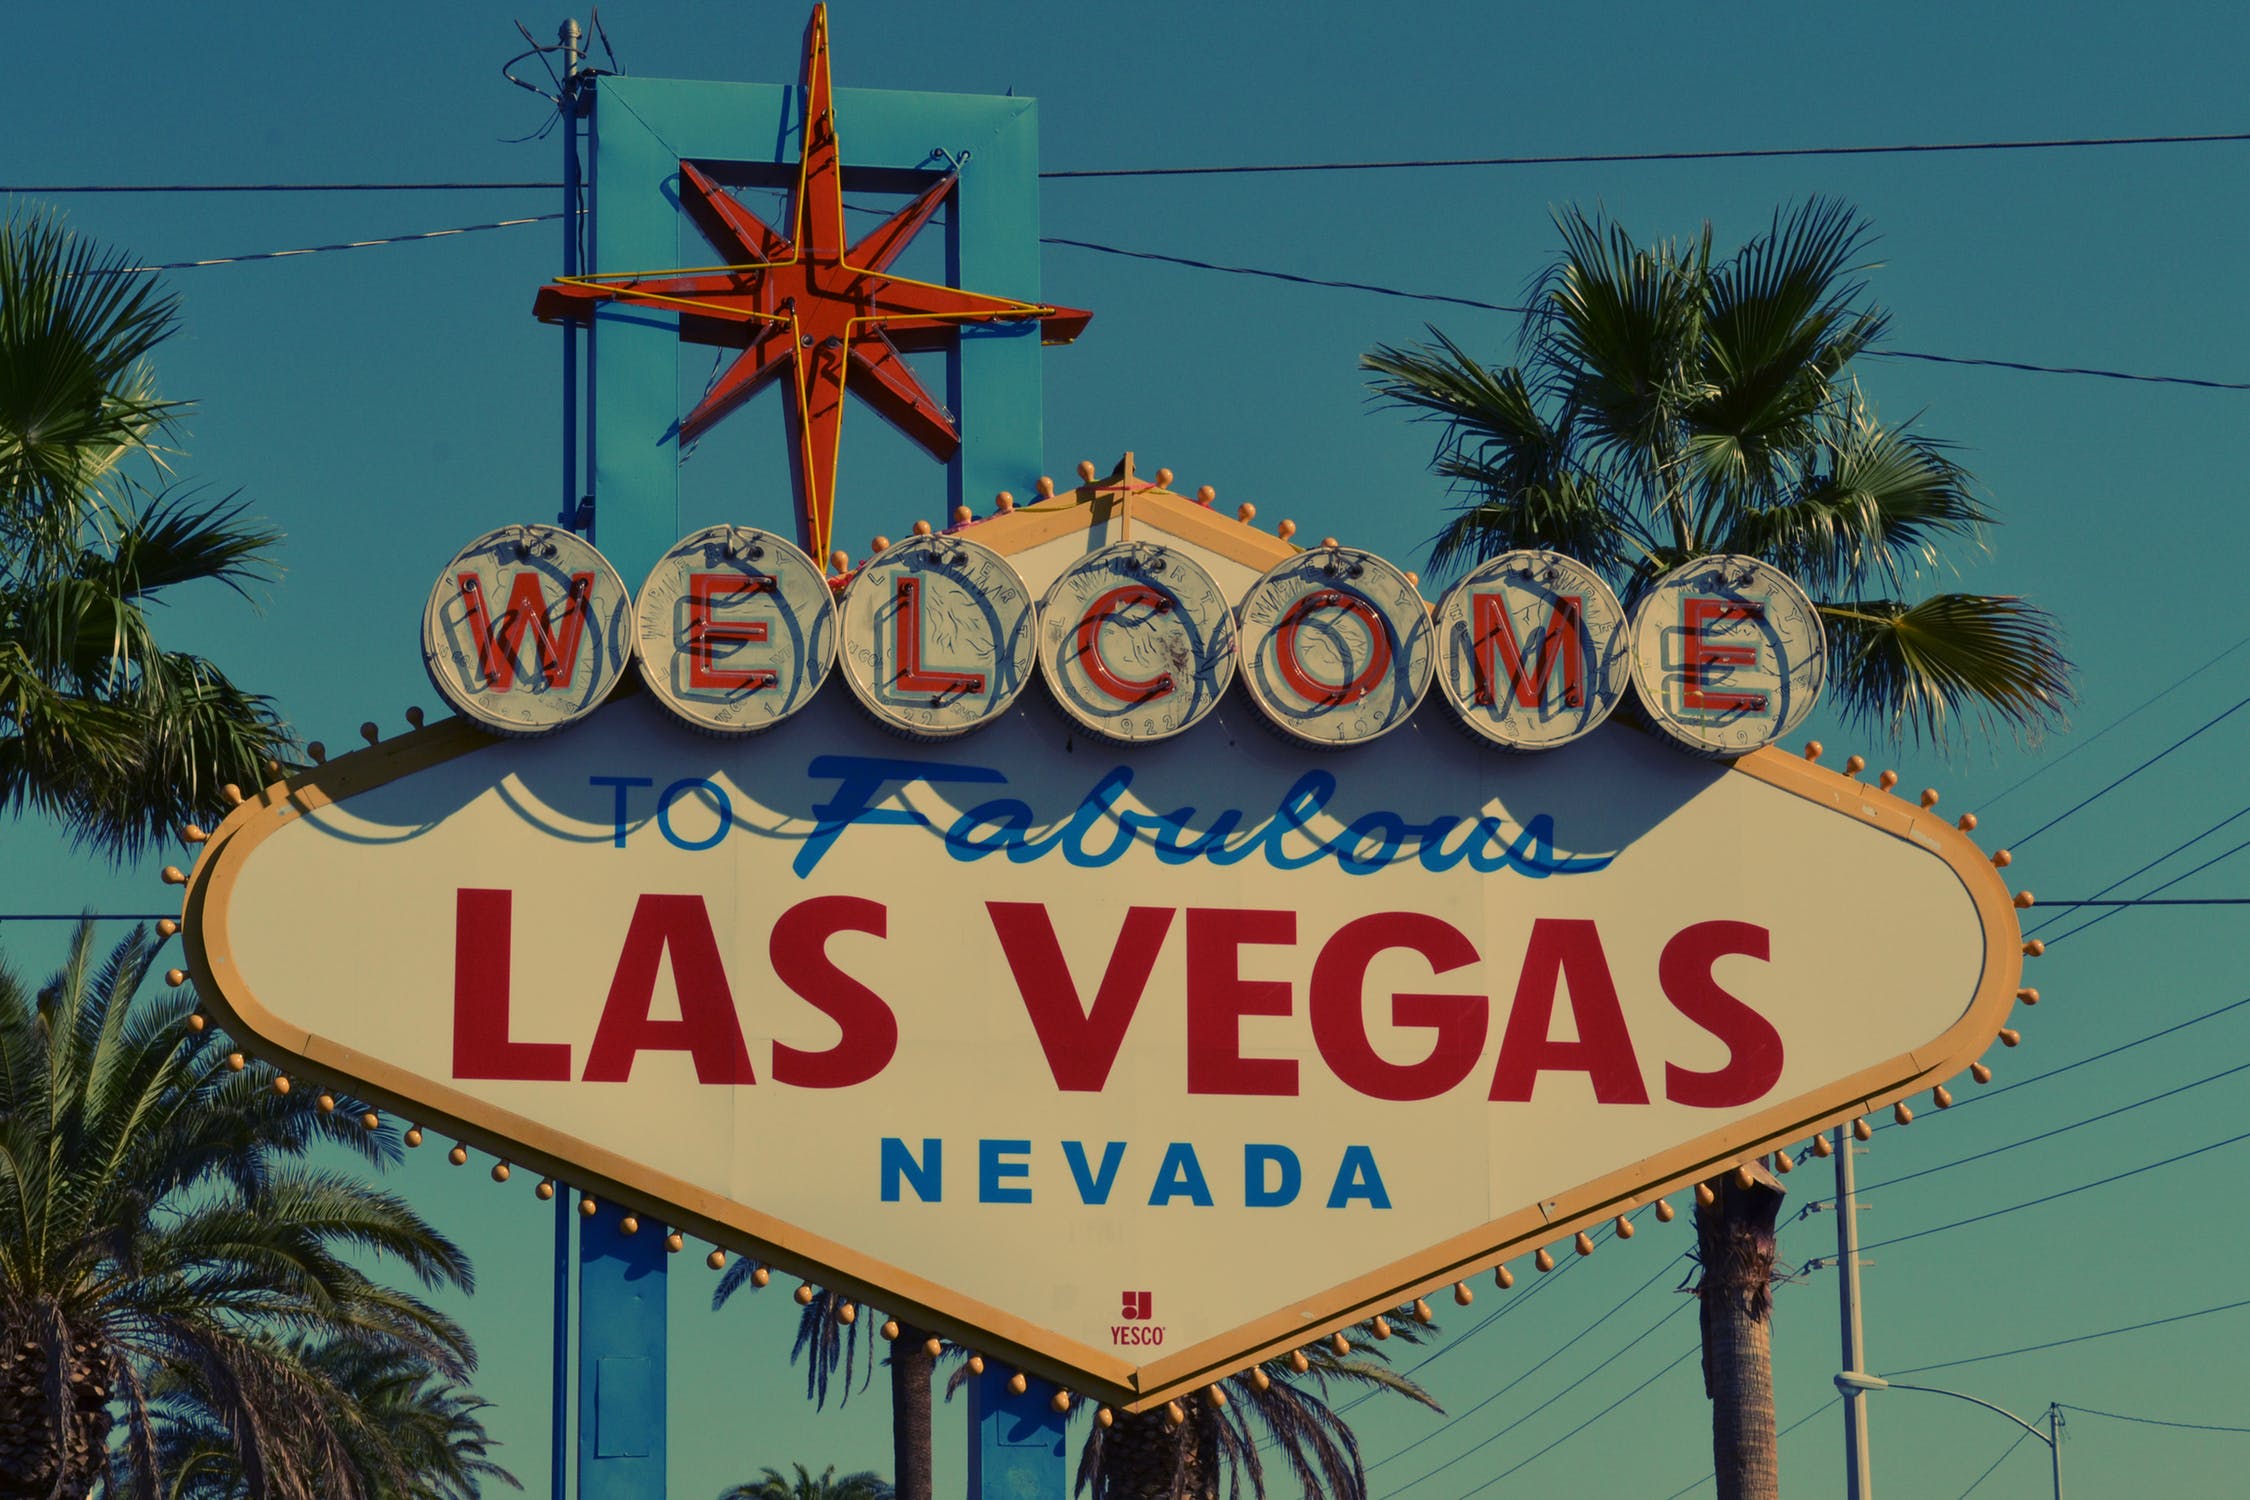 Moving from Las Vegas to Los Angeles is an interesting experience - we hope you will enjoy it!